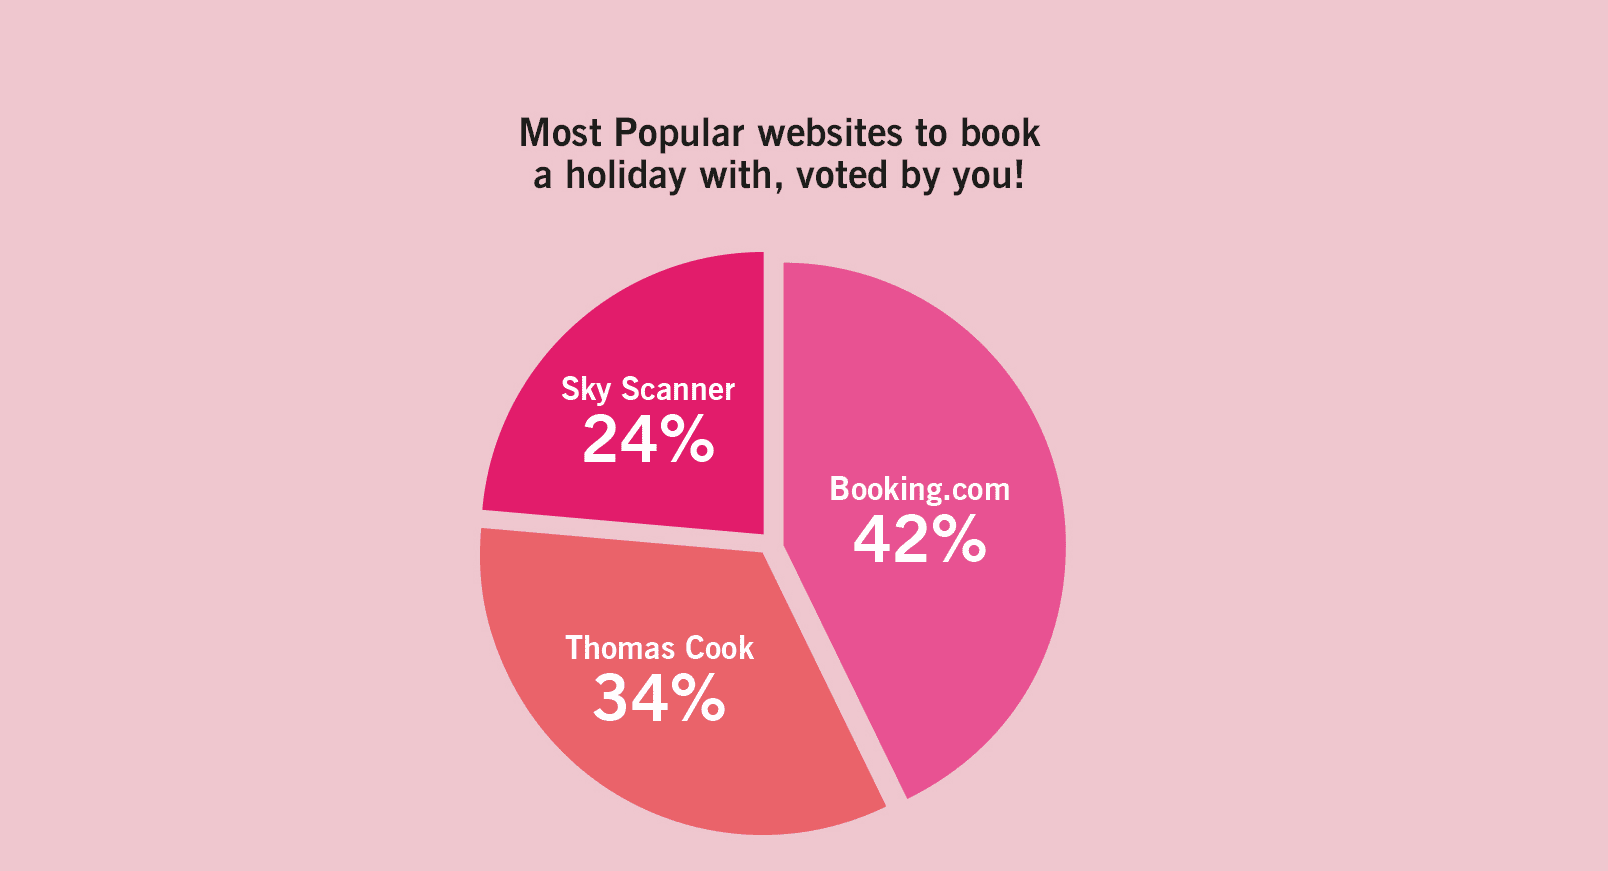 Most Popular websites to book a holiday with